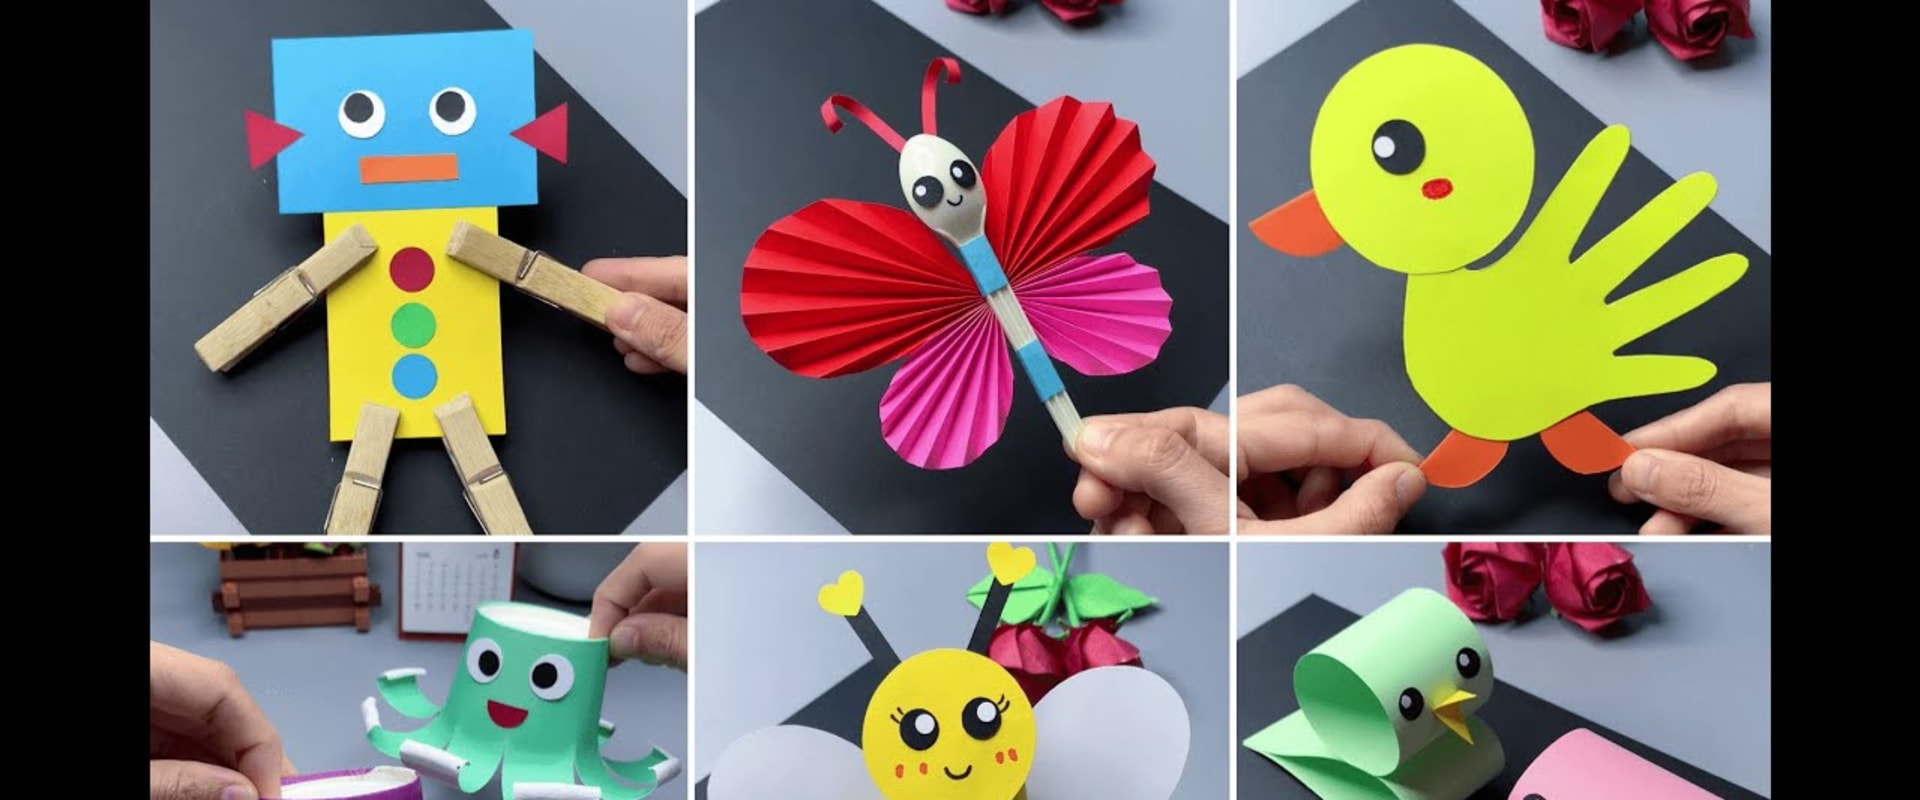 Educational Craft Projects for Kids